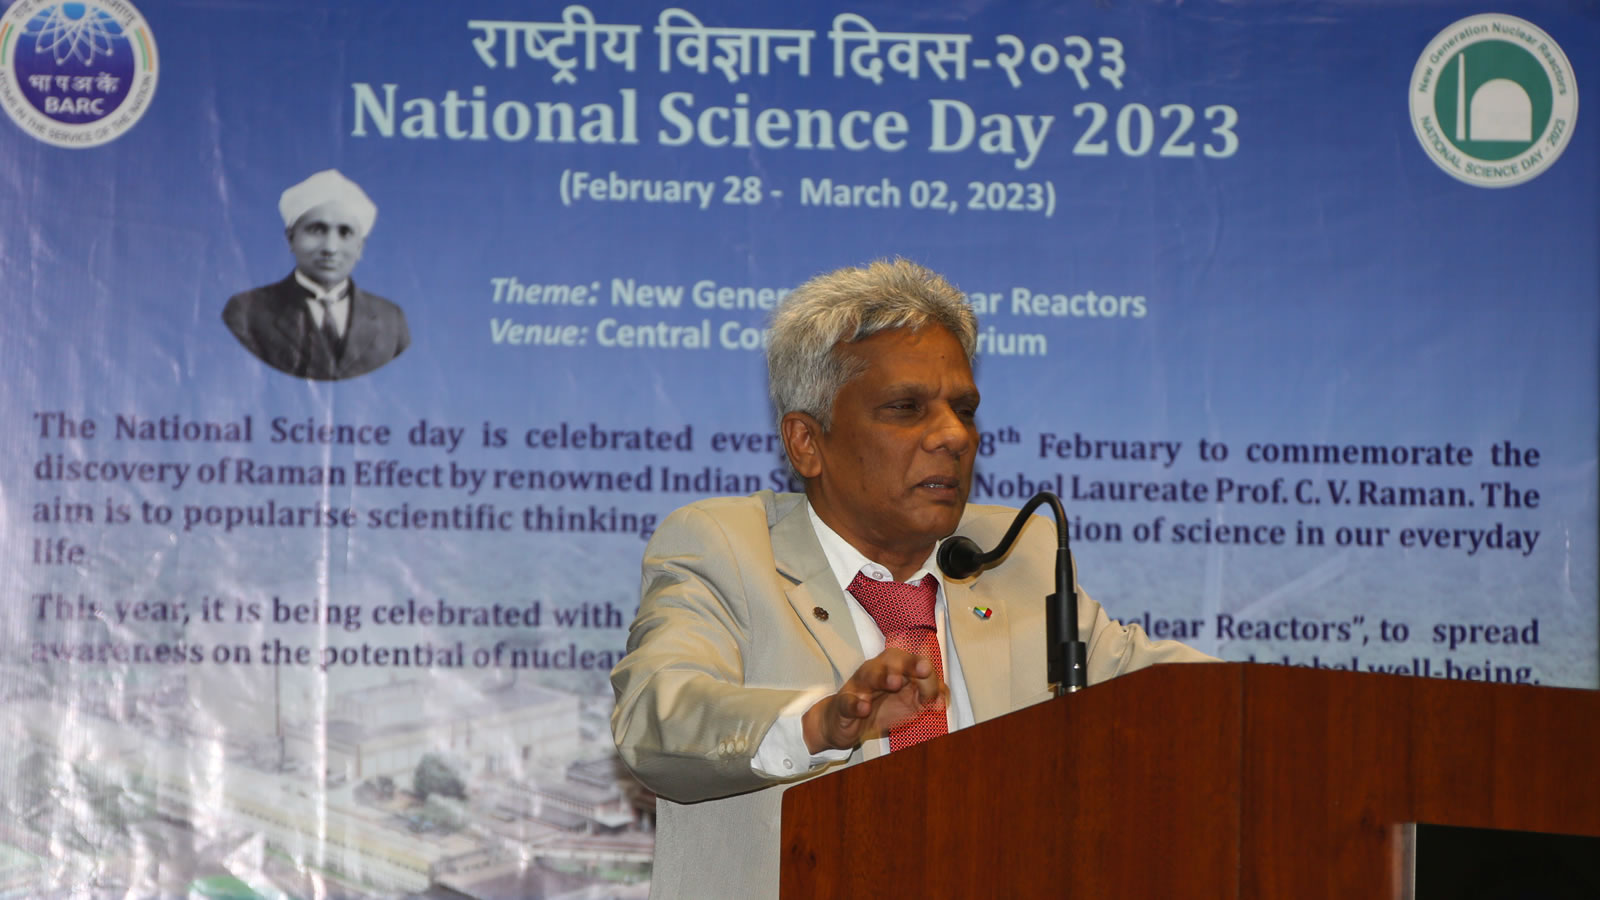 National Science Day 2023 function at BARC